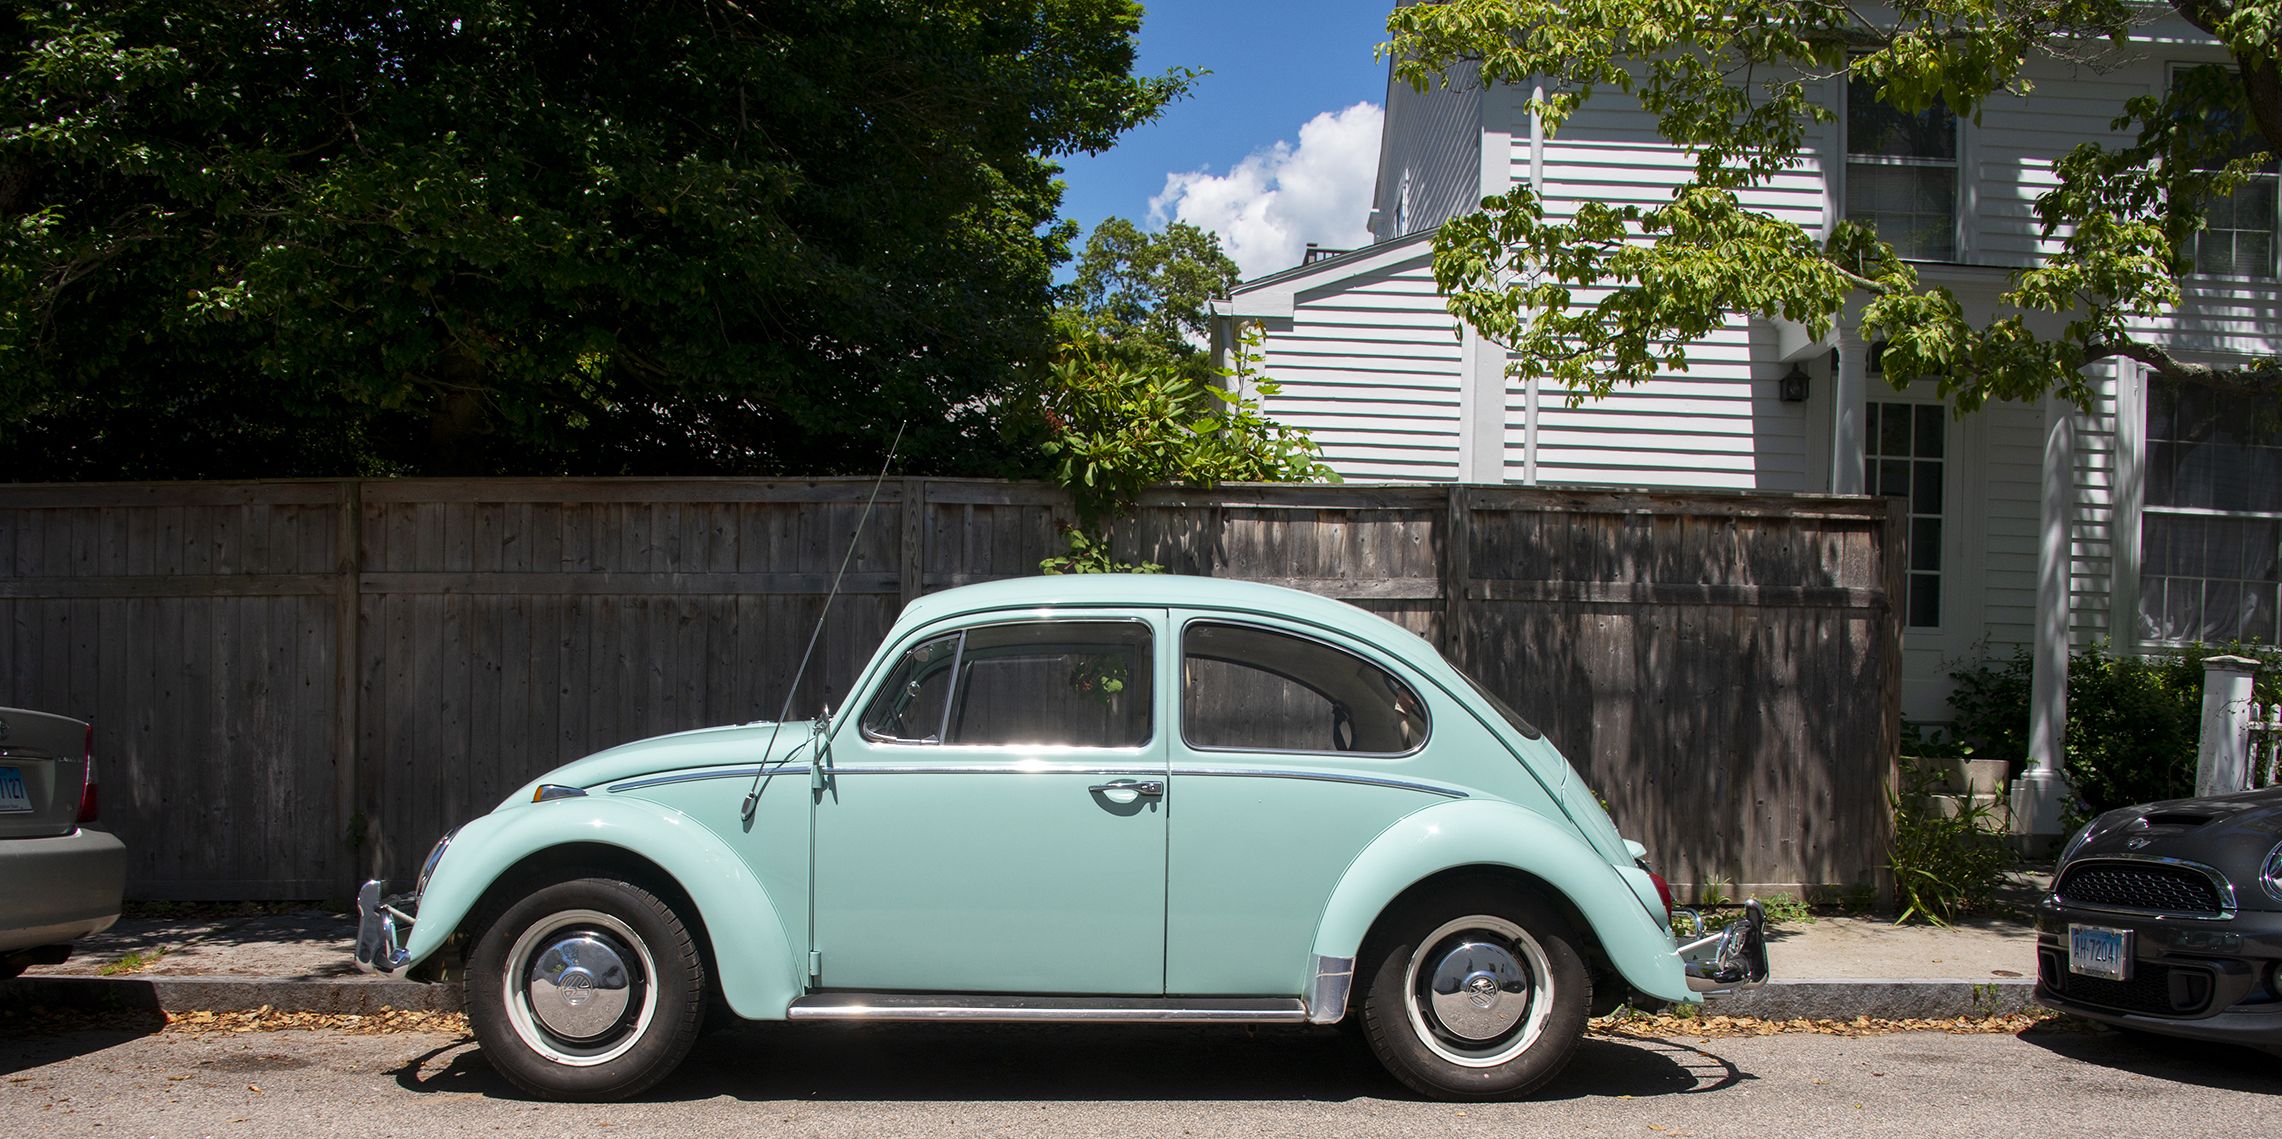 Street-Spotted: Rare VW Beetle 1300 from 1966